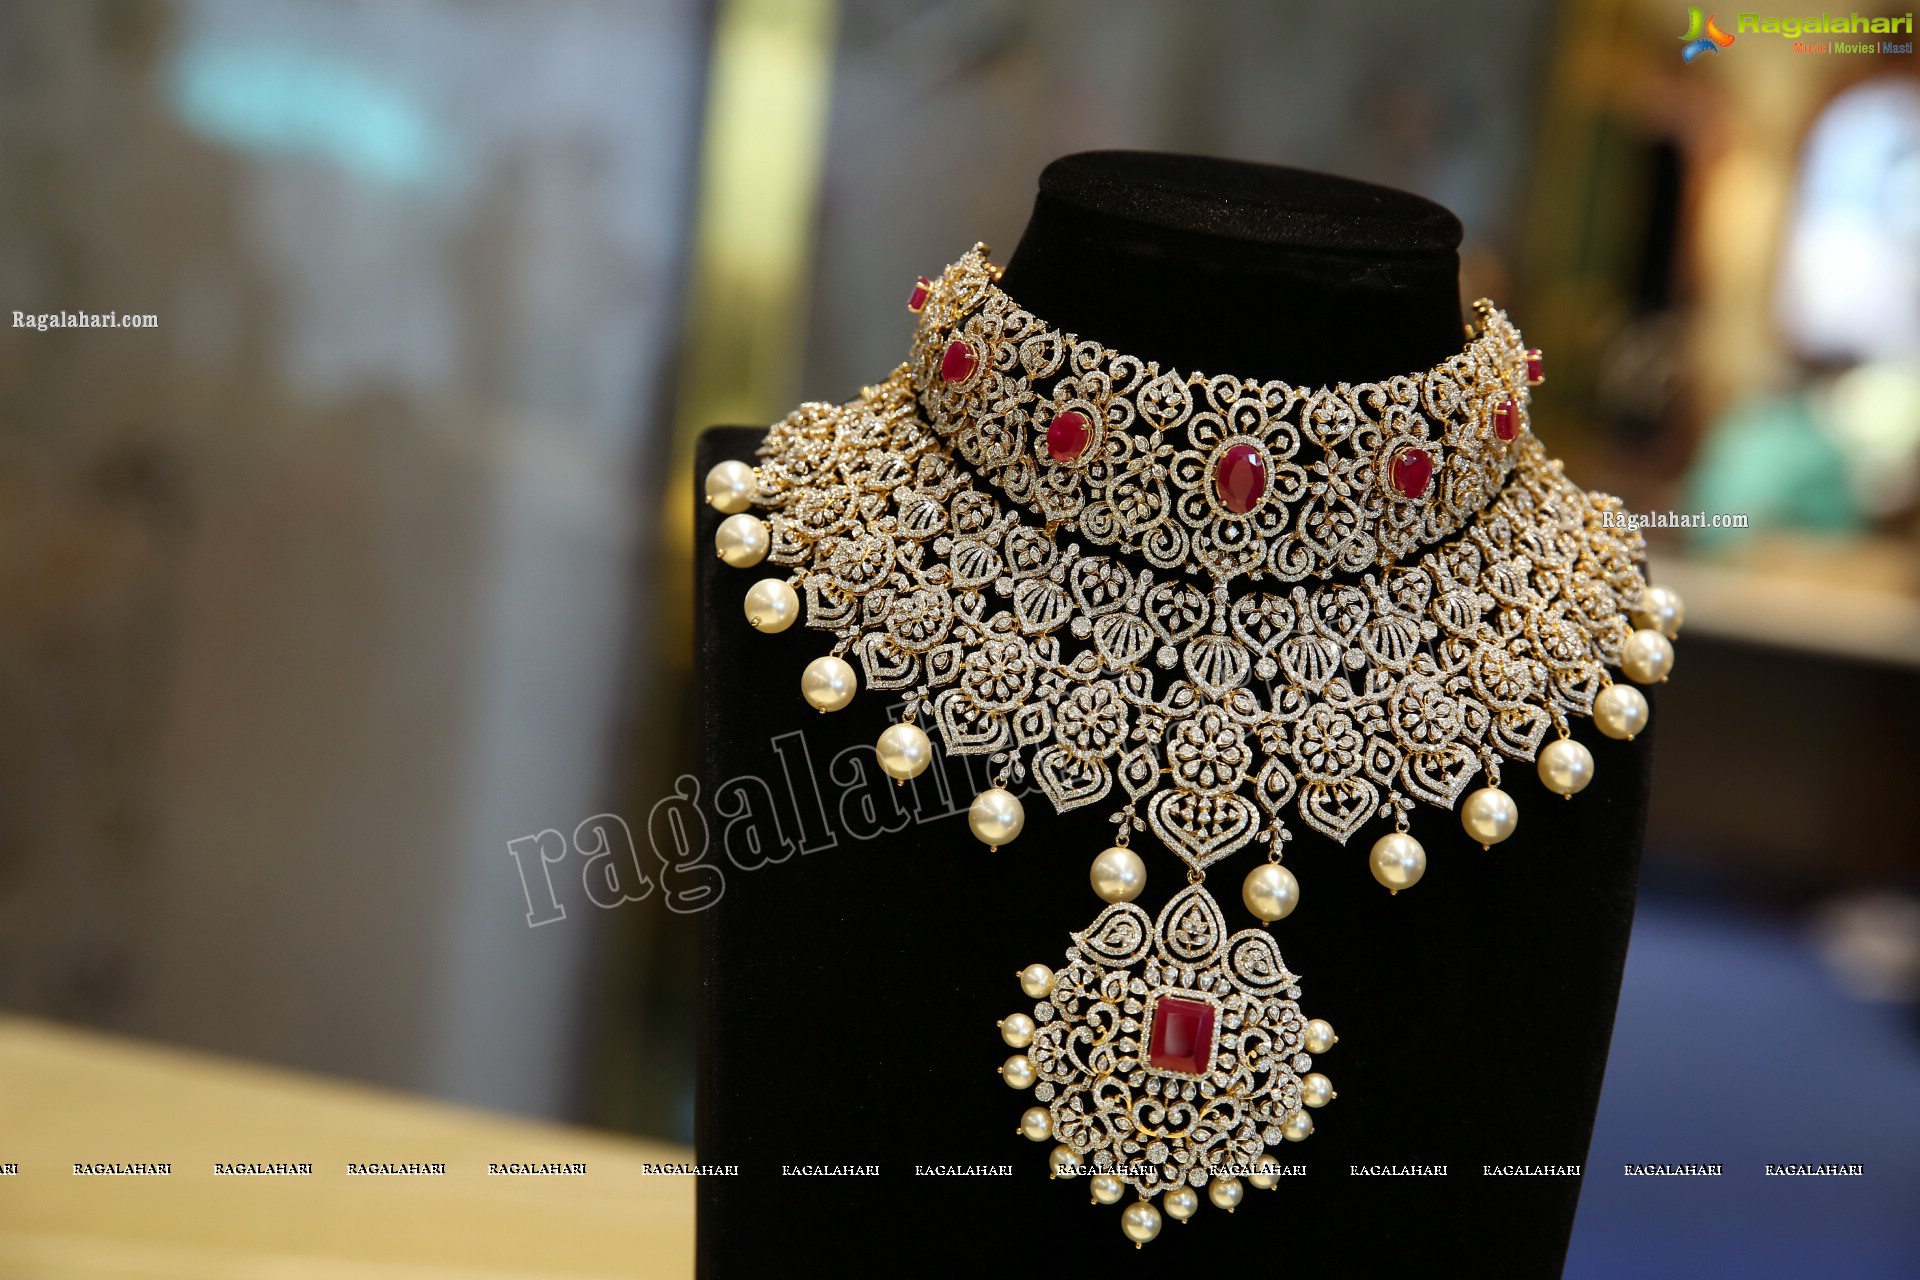 The Diamond Store by Chandubhai New 'Bridal Collection’ Showcase at Jubilee Hills